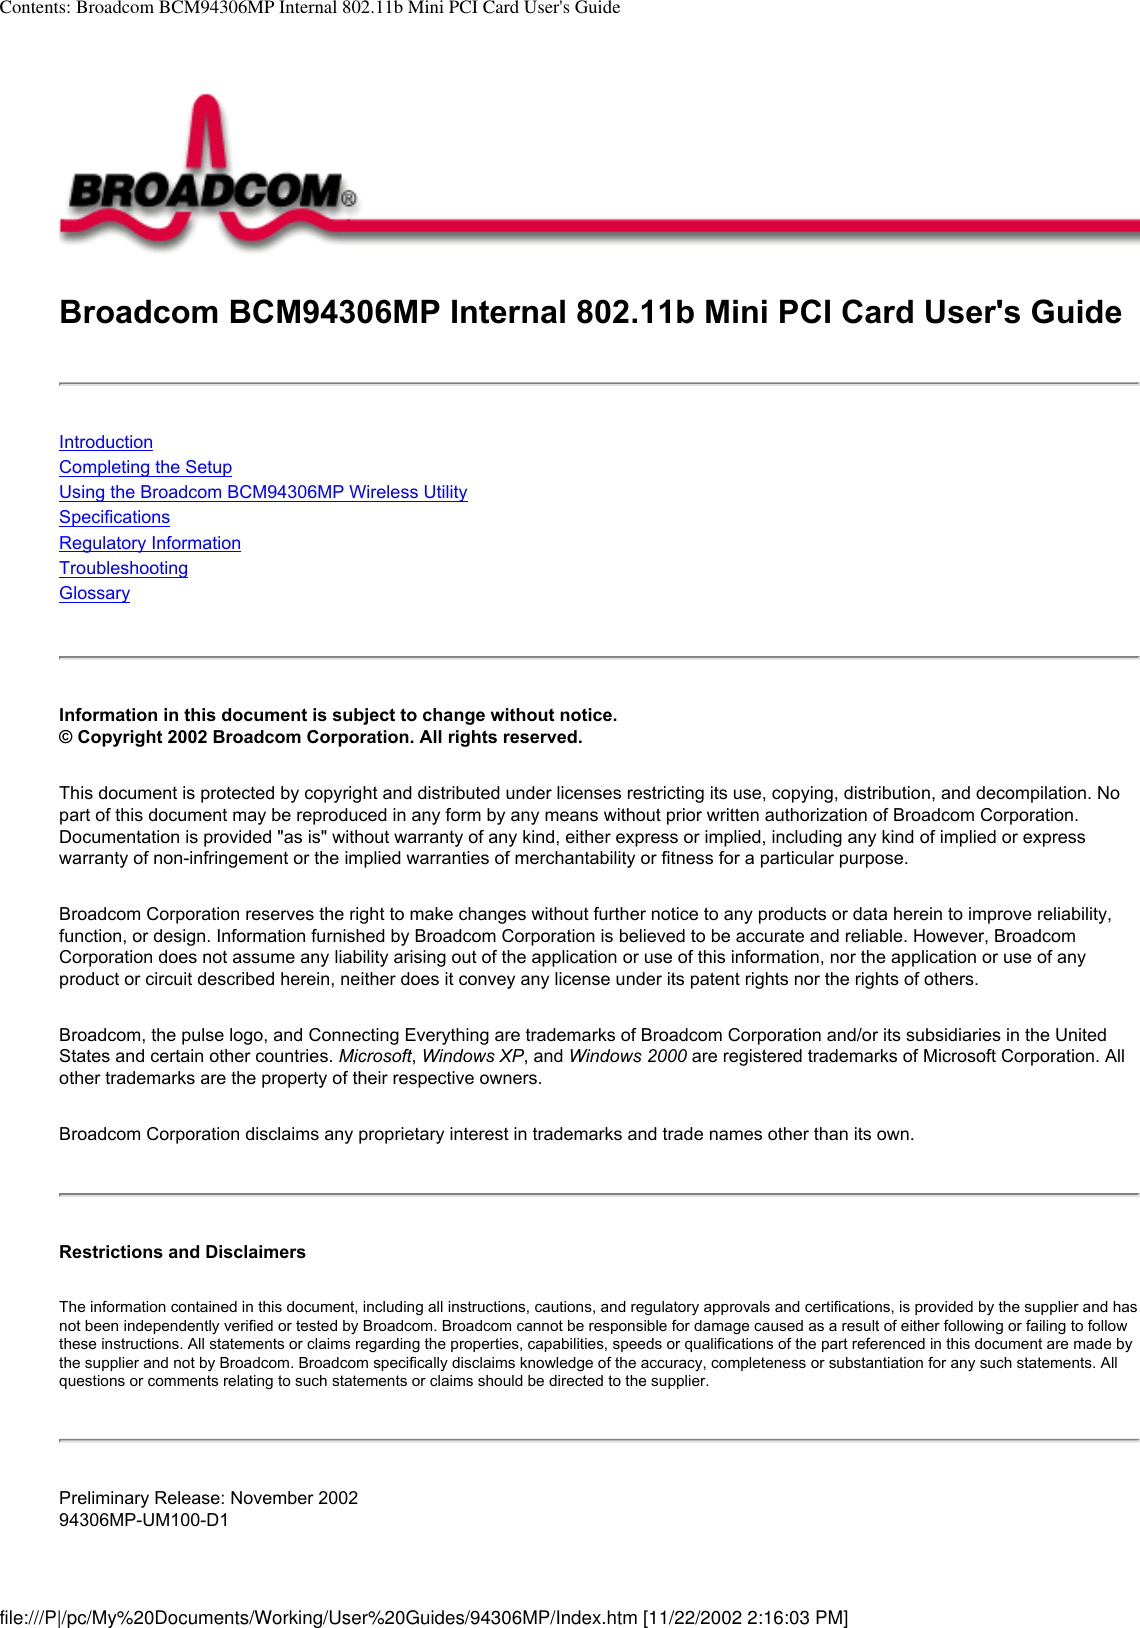 Contents: Broadcom BCM94306MP Internal 802.11b Mini PCI Card User&apos;s GuideBroadcom BCM94306MP Internal 802.11b Mini PCI Card User&apos;s GuideIntroductionCompleting the SetupUsing the Broadcom BCM94306MP Wireless UtilitySpecificationsRegulatory InformationTroubleshooting Glossary Information in this document is subject to change without notice.© Copyright 2002 Broadcom Corporation. All rights reserved. This document is protected by copyright and distributed under licenses restricting its use, copying, distribution, and decompilation. No part of this document may be reproduced in any form by any means without prior written authorization of Broadcom Corporation. Documentation is provided &quot;as is&quot; without warranty of any kind, either express or implied, including any kind of implied or express warranty of non-infringement or the implied warranties of merchantability or fitness for a particular purpose. Broadcom Corporation reserves the right to make changes without further notice to any products or data herein to improve reliability, function, or design. Information furnished by Broadcom Corporation is believed to be accurate and reliable. However, Broadcom Corporation does not assume any liability arising out of the application or use of this information, nor the application or use of any product or circuit described herein, neither does it convey any license under its patent rights nor the rights of others. Broadcom, the pulse logo, and Connecting Everything are trademarks of Broadcom Corporation and/or its subsidiaries in the United States and certain other countries. Microsoft, Windows XP, and Windows 2000 are registered trademarks of Microsoft Corporation. All other trademarks are the property of their respective owners. Broadcom Corporation disclaims any proprietary interest in trademarks and trade names other than its own. Restrictions and Disclaimers The information contained in this document, including all instructions, cautions, and regulatory approvals and certifications, is provided by the supplier and has not been independently verified or tested by Broadcom. Broadcom cannot be responsible for damage caused as a result of either following or failing to follow these instructions. All statements or claims regarding the properties, capabilities, speeds or qualifications of the part referenced in this document are made by the supplier and not by Broadcom. Broadcom specifically disclaims knowledge of the accuracy, completeness or substantiation for any such statements. All questions or comments relating to such statements or claims should be directed to the supplier. Preliminary Release: November 200294306MP-UM100-D1file:///P|/pc/My%20Documents/Working/User%20Guides/94306MP/Index.htm [11/22/2002 2:16:03 PM]